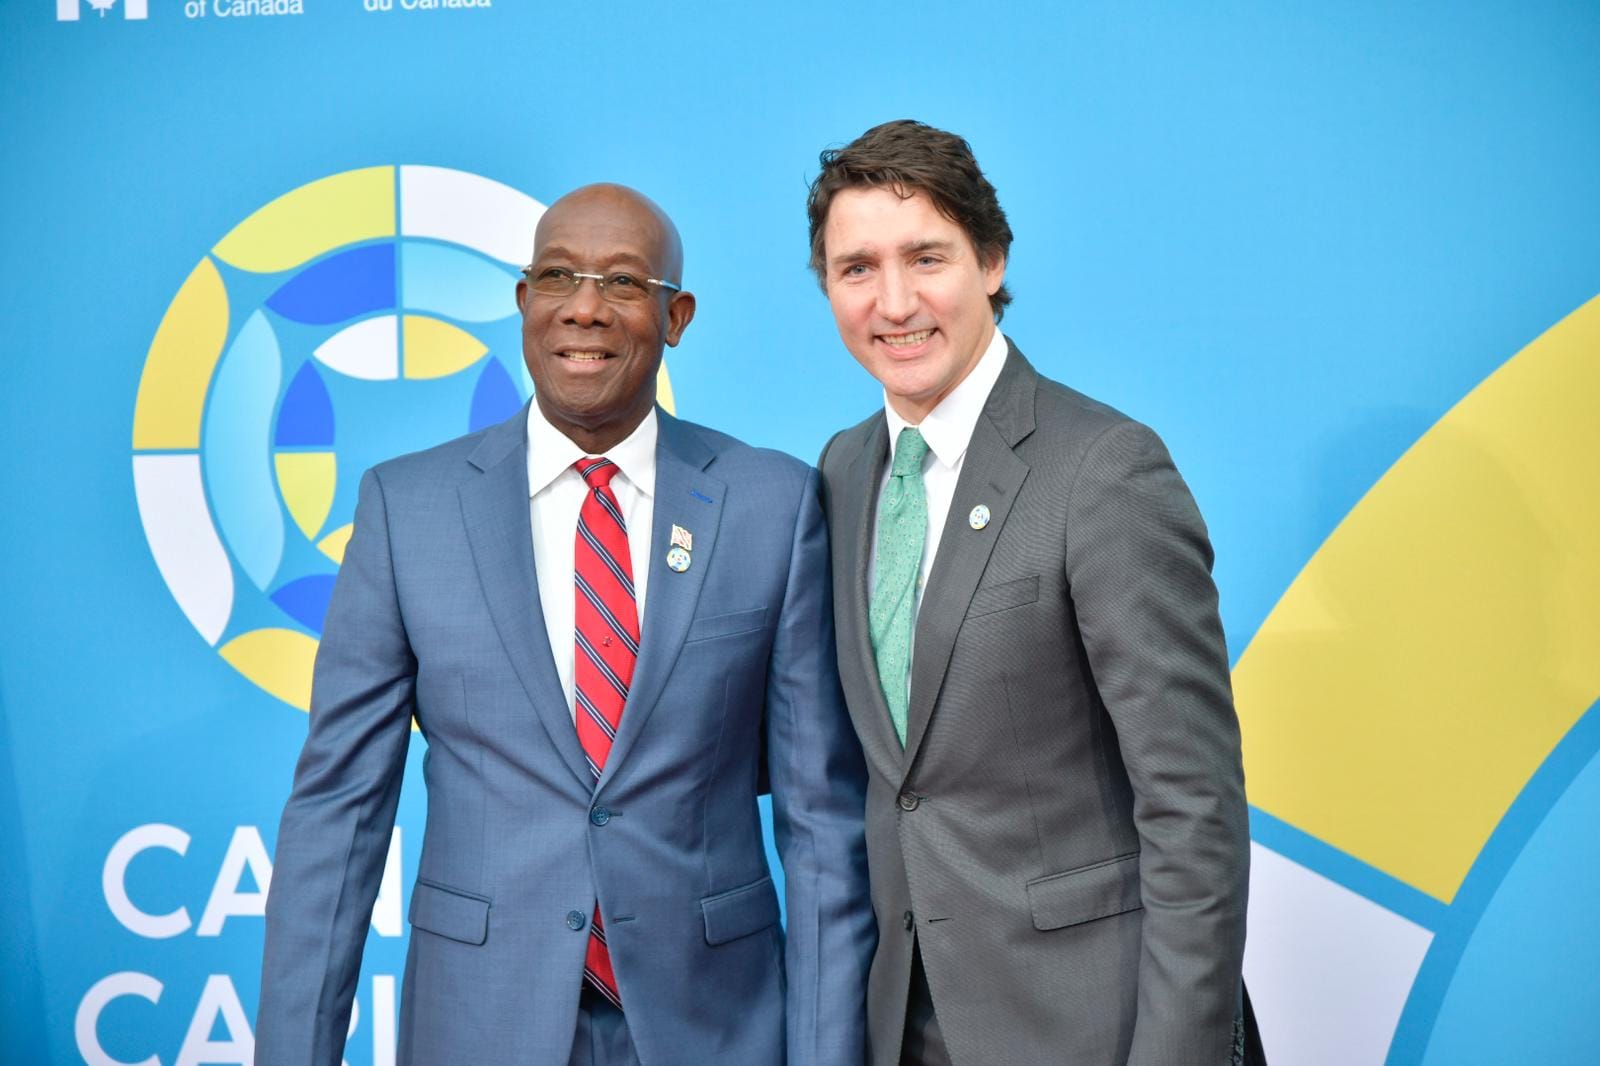 PM’s meet – Rowley and Trudeau at Canada-CARICOM Summit